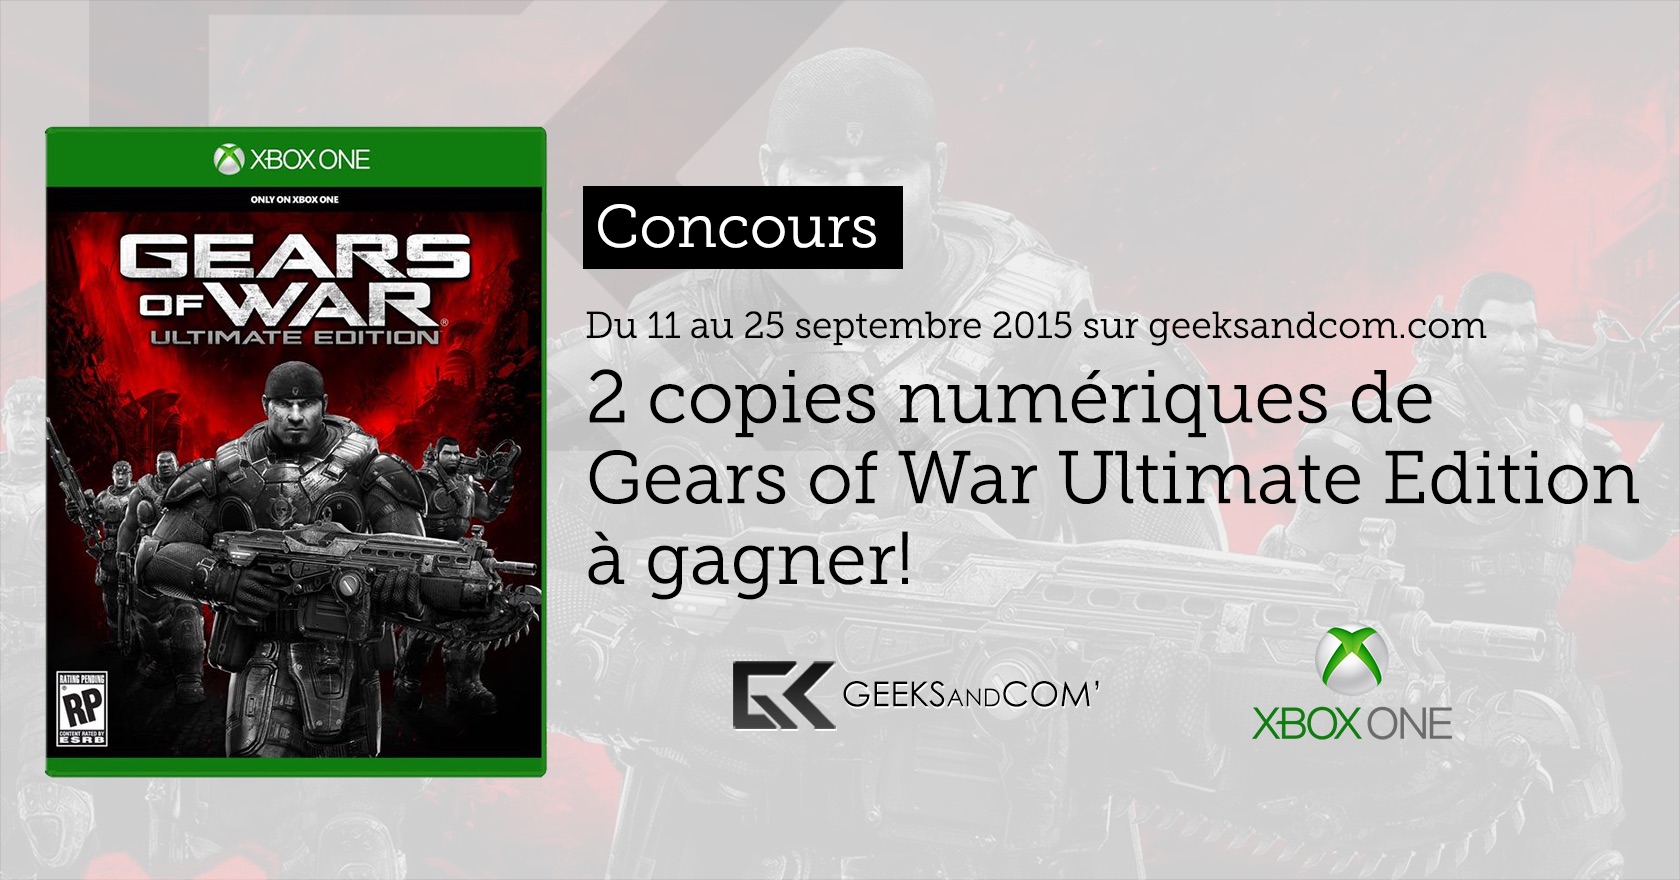 Concours Geeks and Com - Gears of War Ultimate Edition